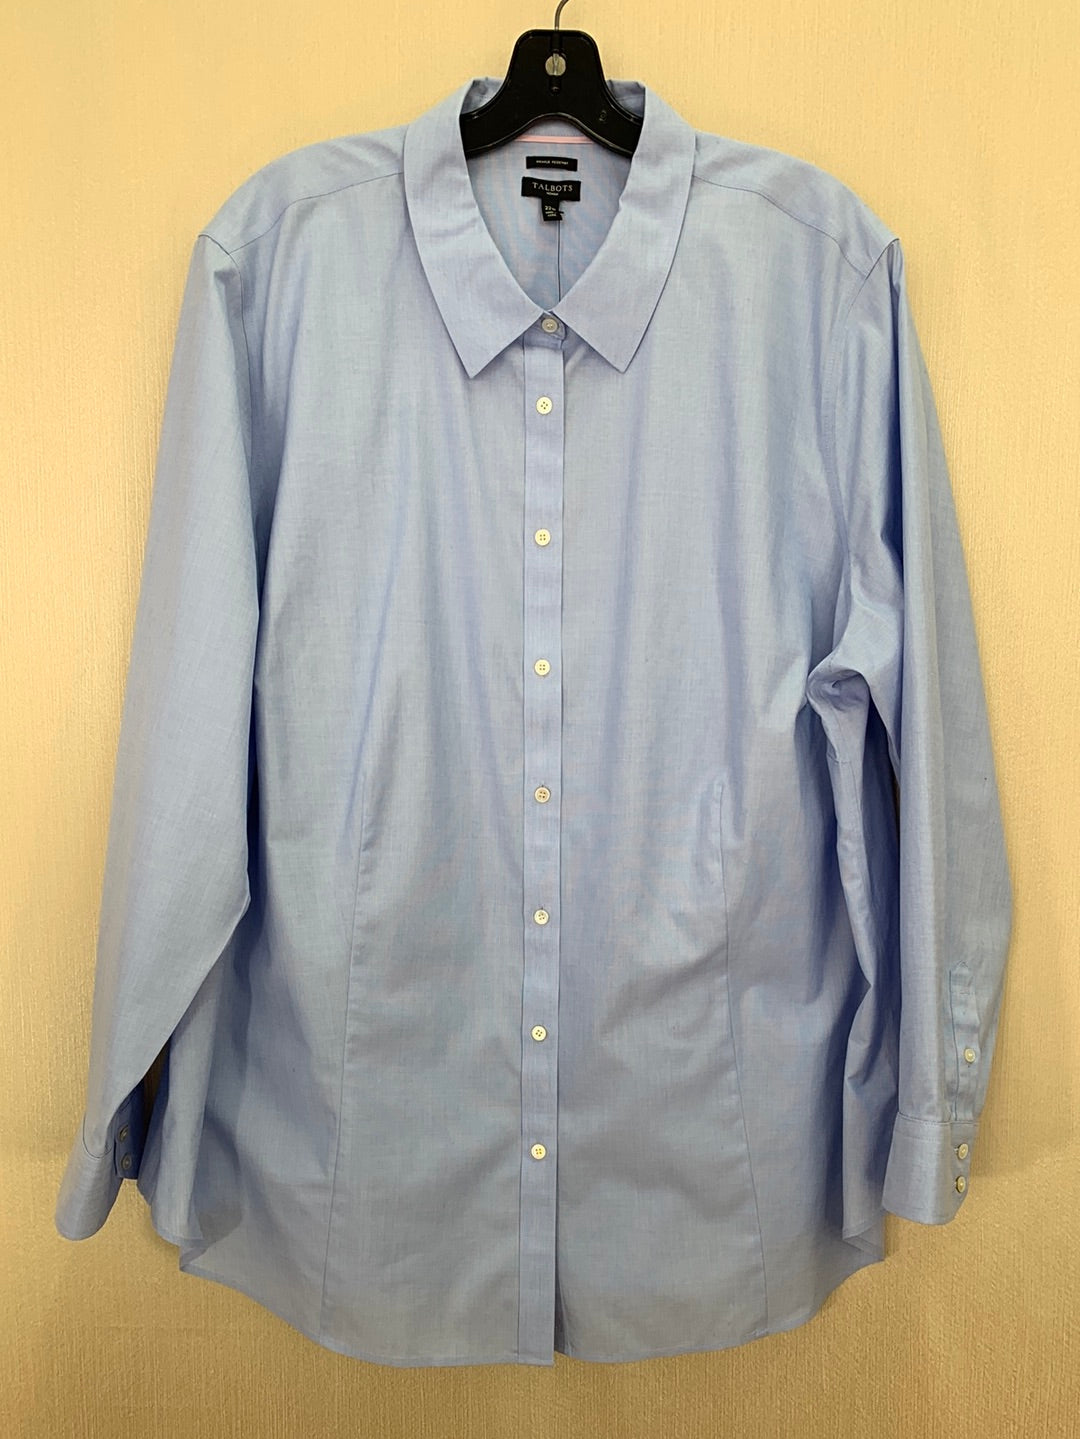 NWT - TALBOTS blue 100% Cotton Wrinkle Resistant Button Down Top - 22W